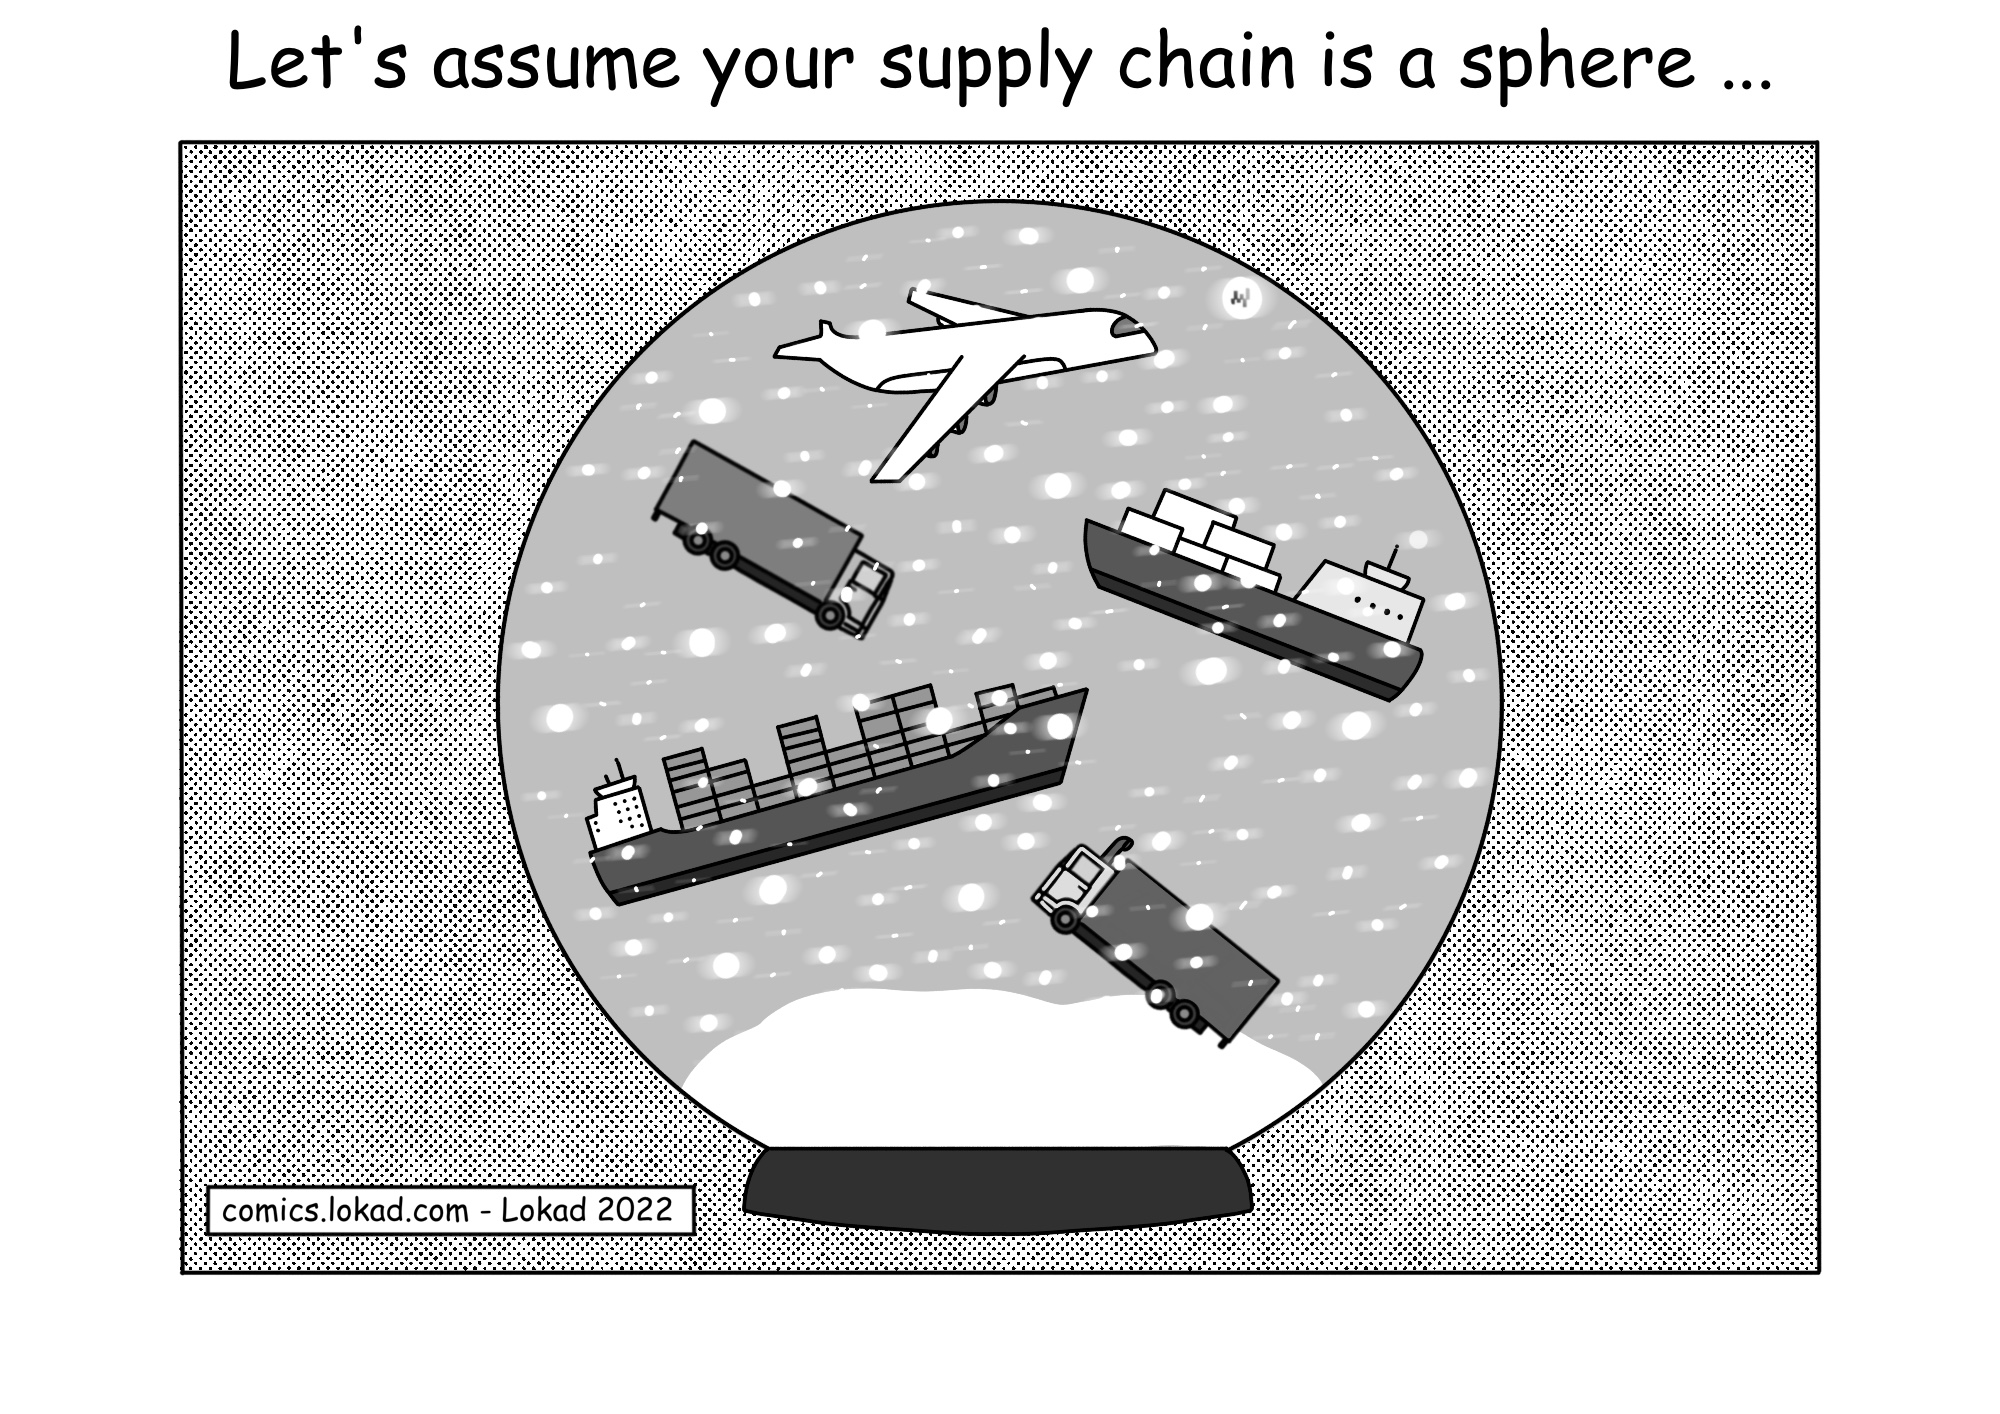 Let's assume your supply chain is a sphere...